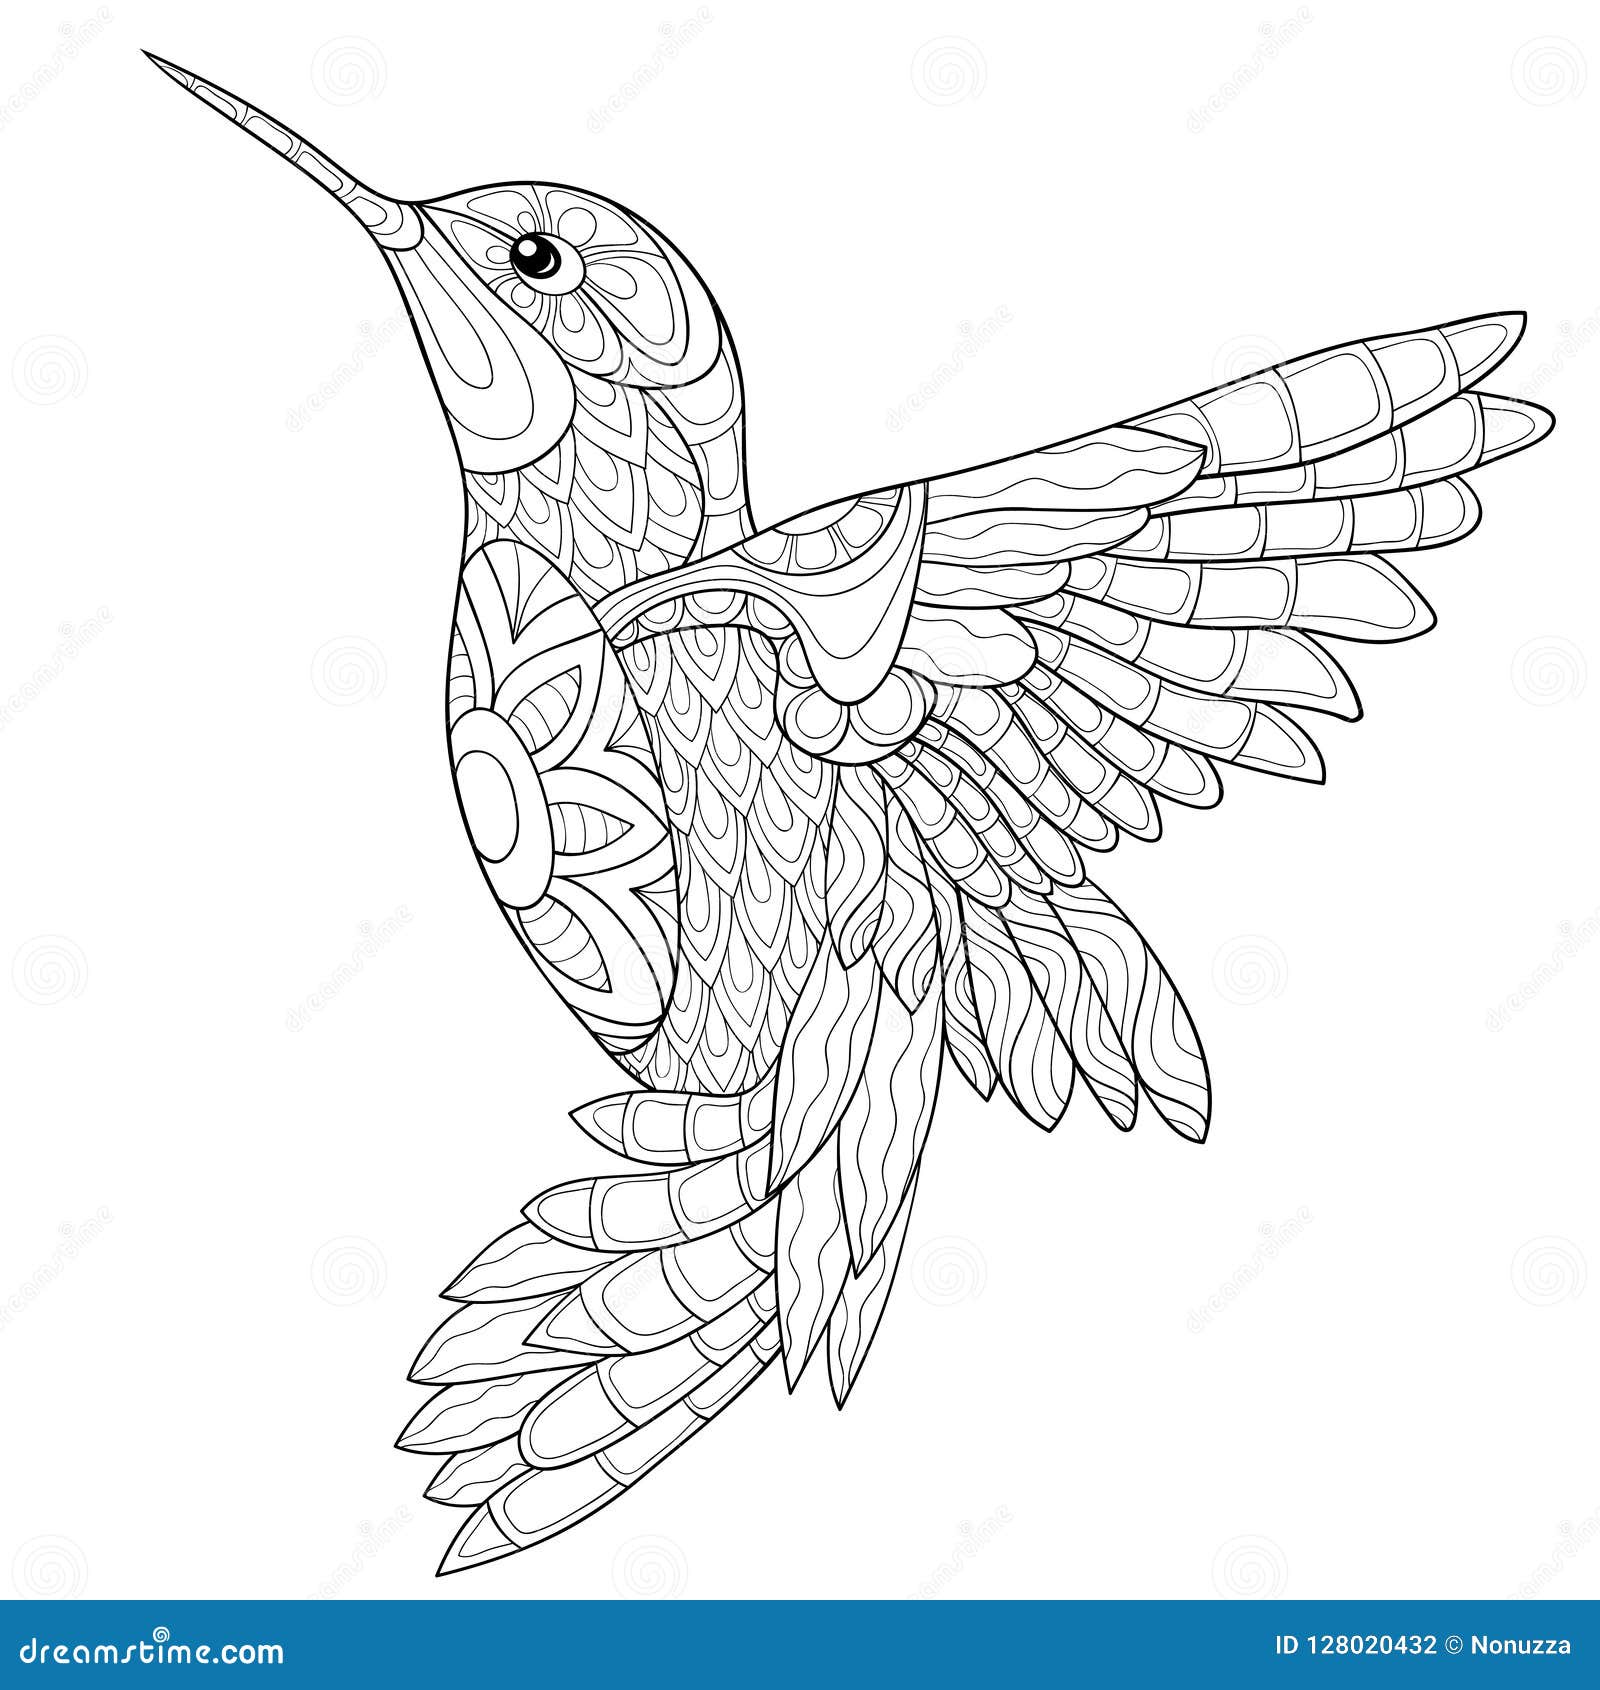 Adult Coloring Page,book a Bird Image for Relaxing. Stock Vector ...